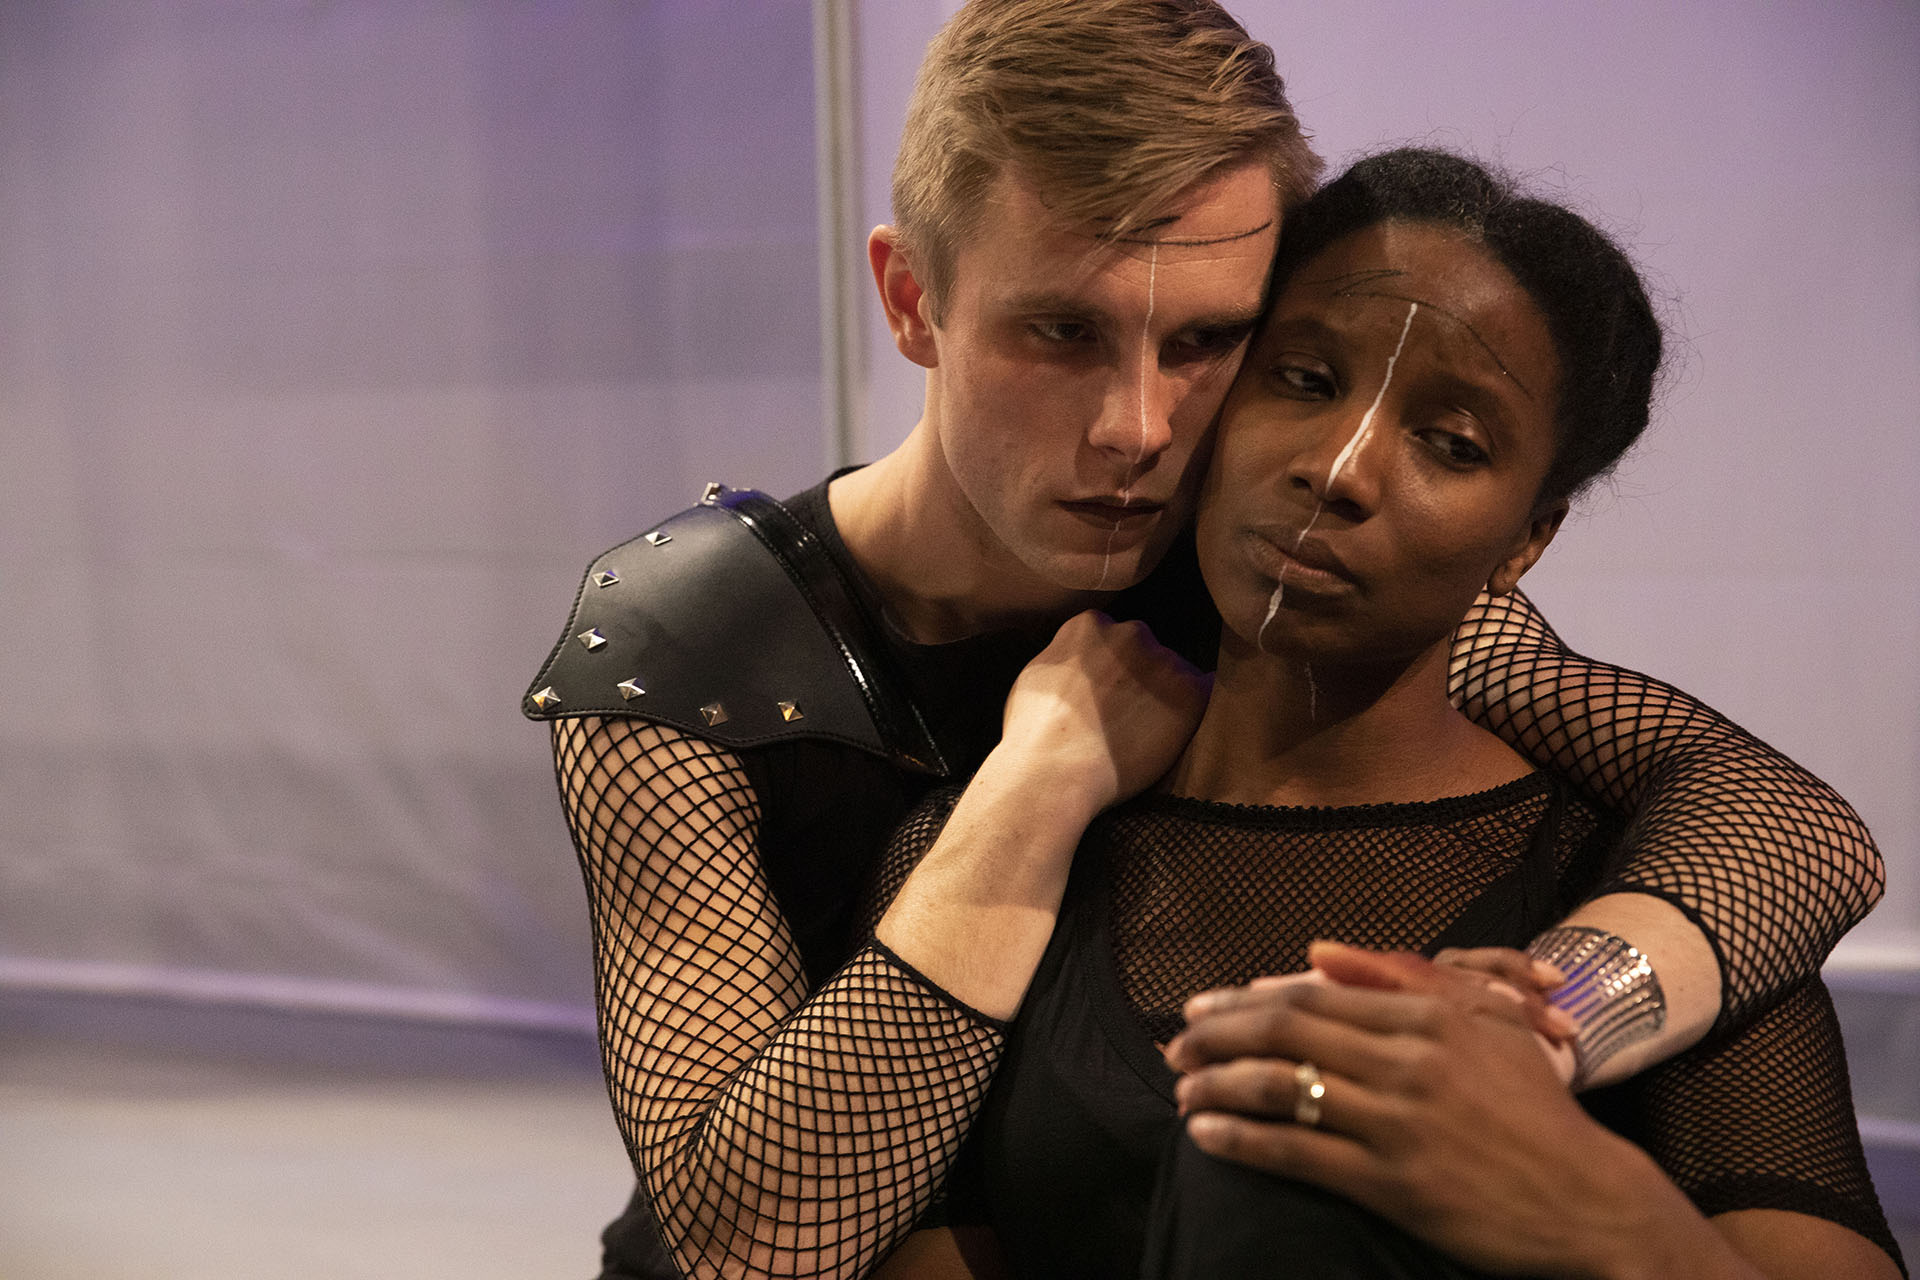 two actors, a white man and a Black woman, embracing